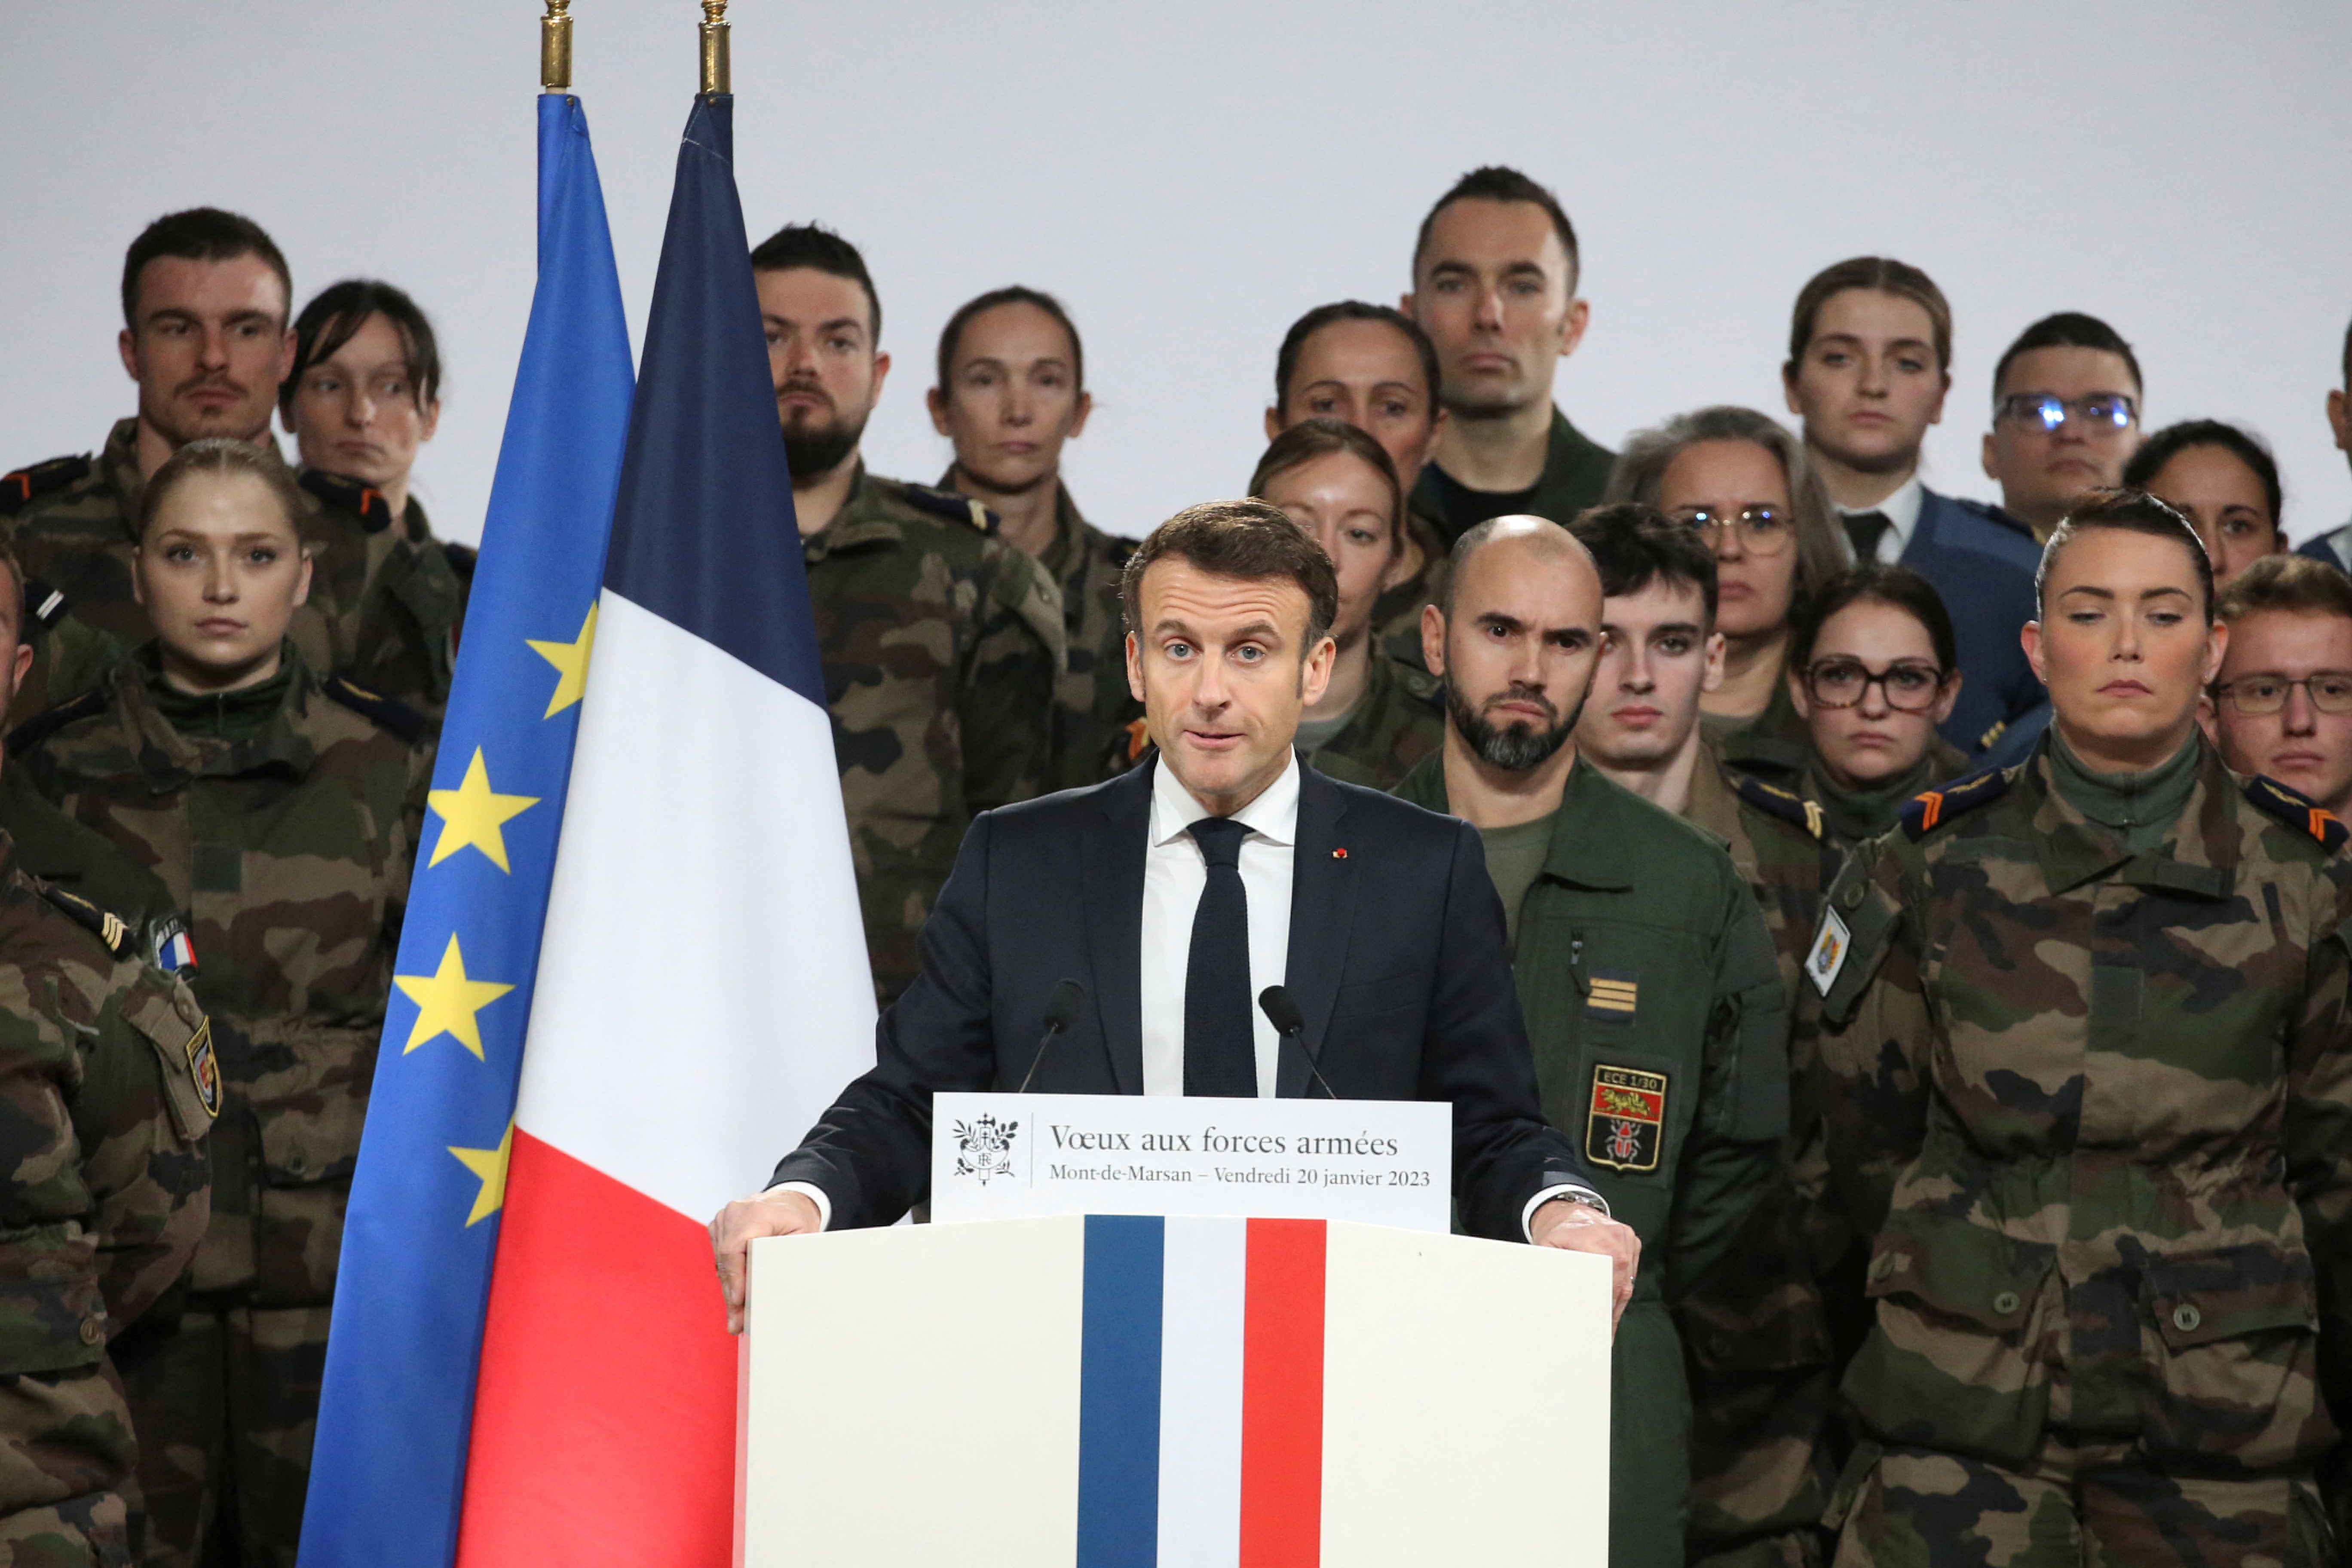 French President Emmanuel Macron's New Year address to the French Army, at the Mont-de-Marsan air base